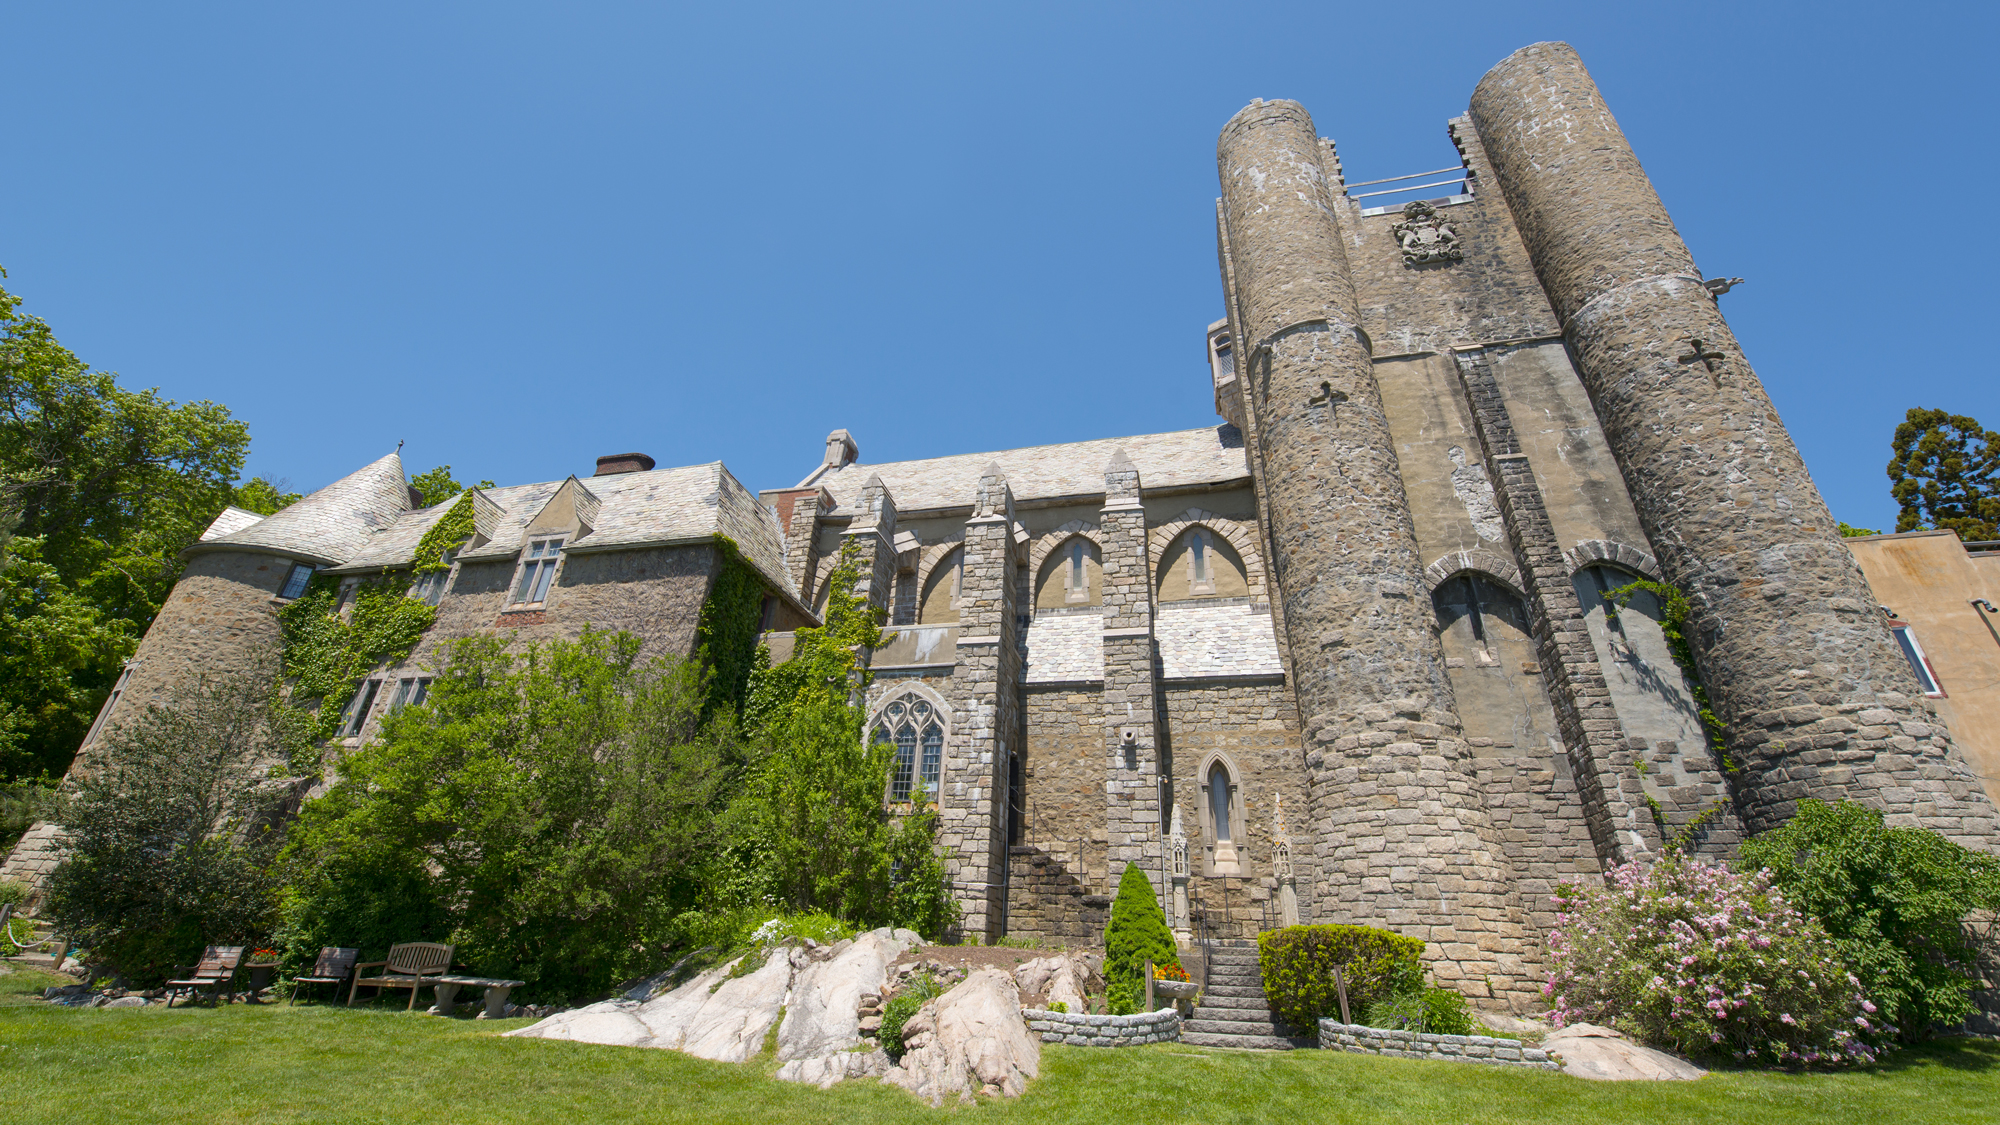 Stone towers of one of the most interesting museums and castles in the US at Hammond Castle in Gloucester, Massachusetts